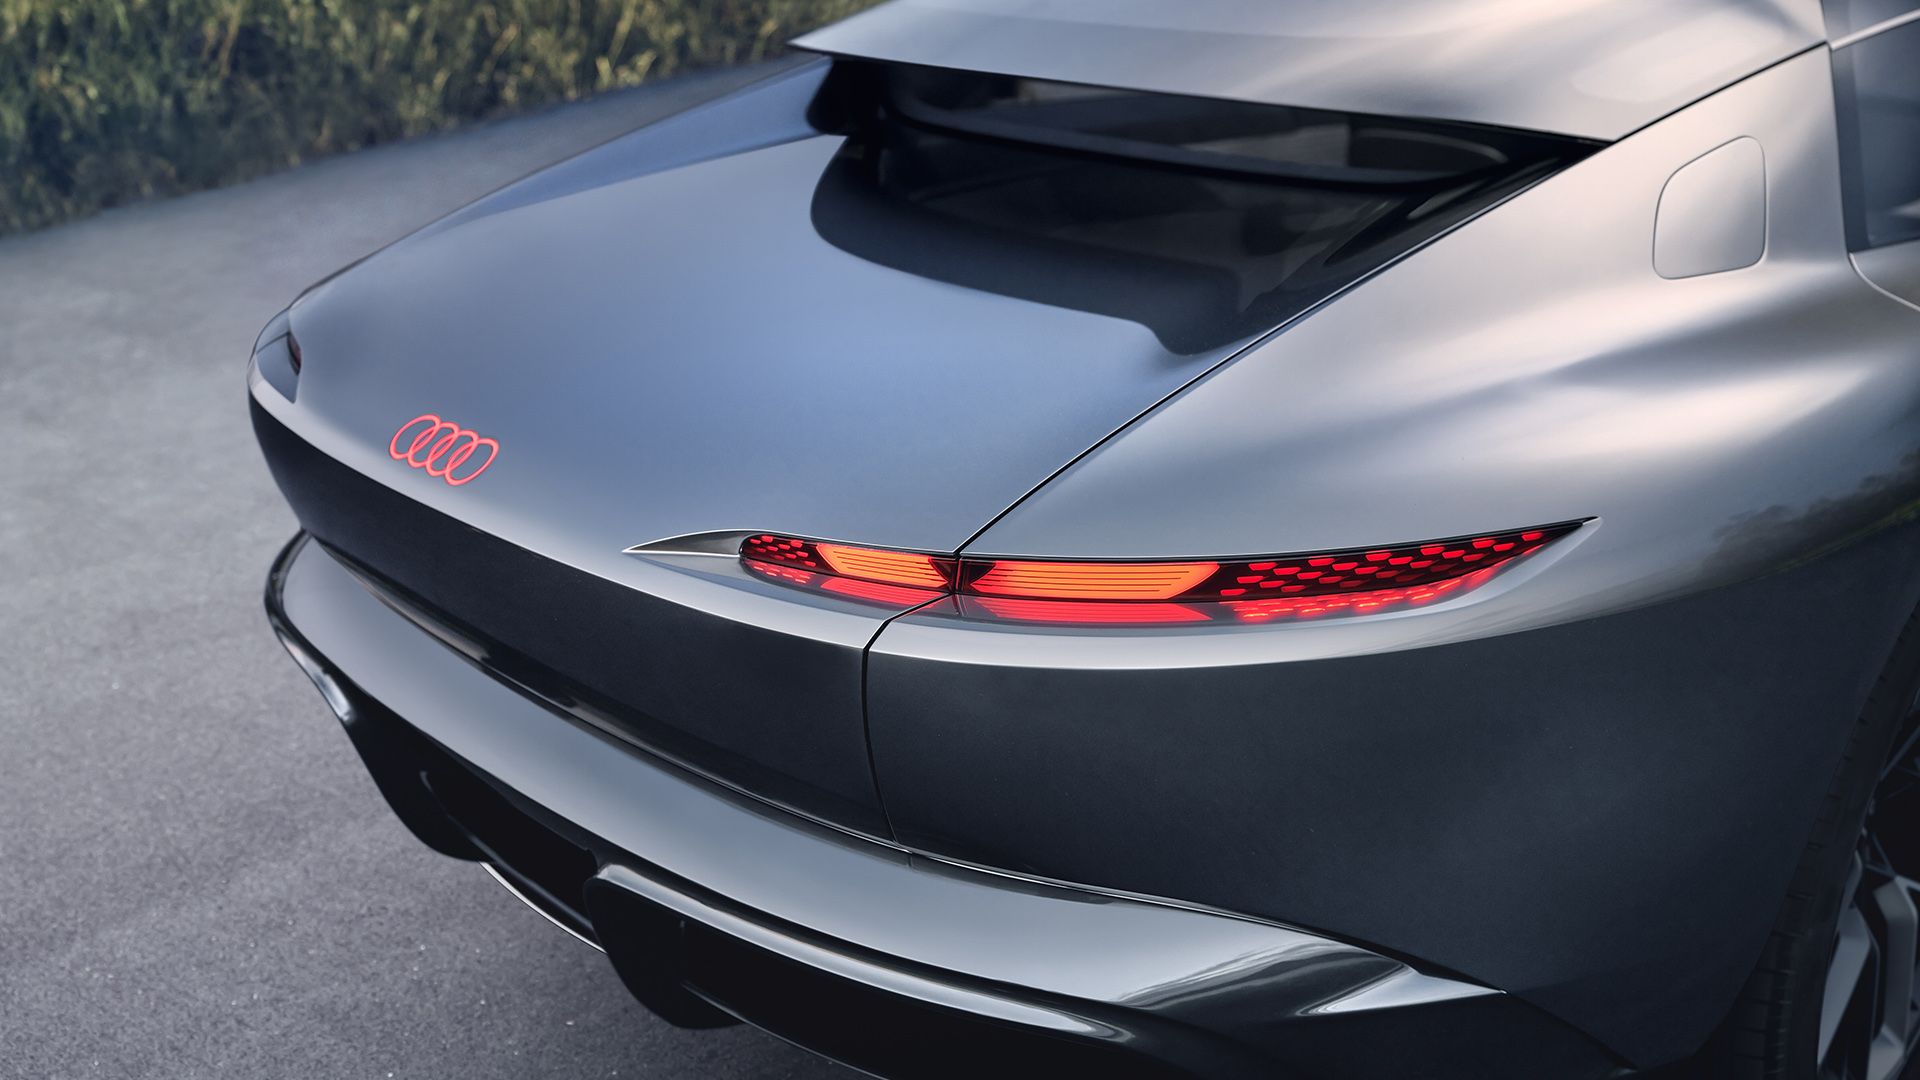 View of the taillights on the rear of the Audi grandsphere concept.